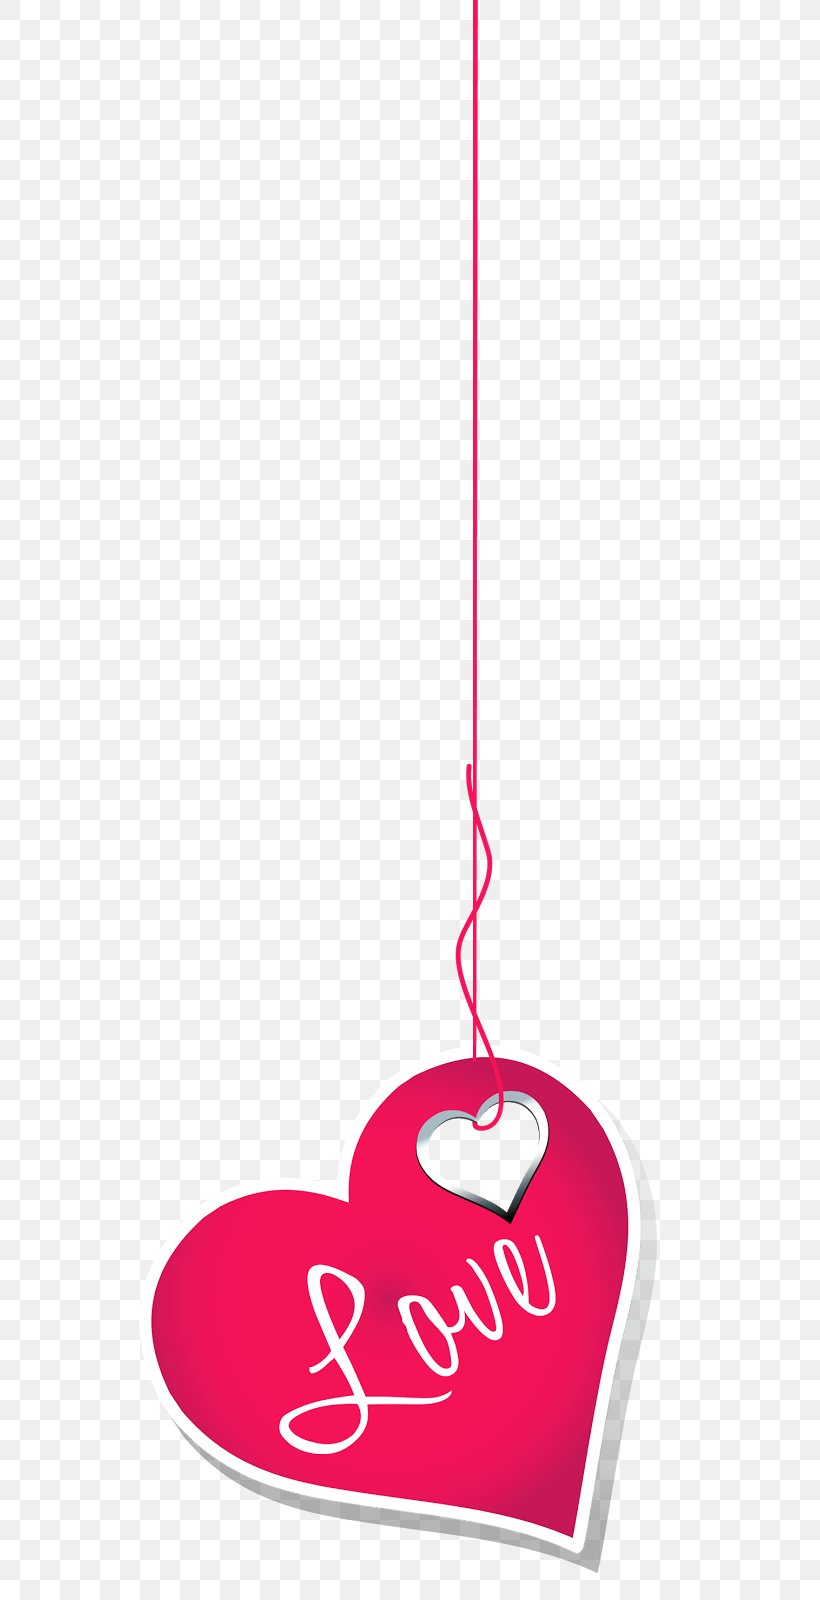 Heart Christmas Ornament Clip Art, PNG, 575x1600px, Heart, Animation, Christmas, Christmas Ornament, Drawing Download Free